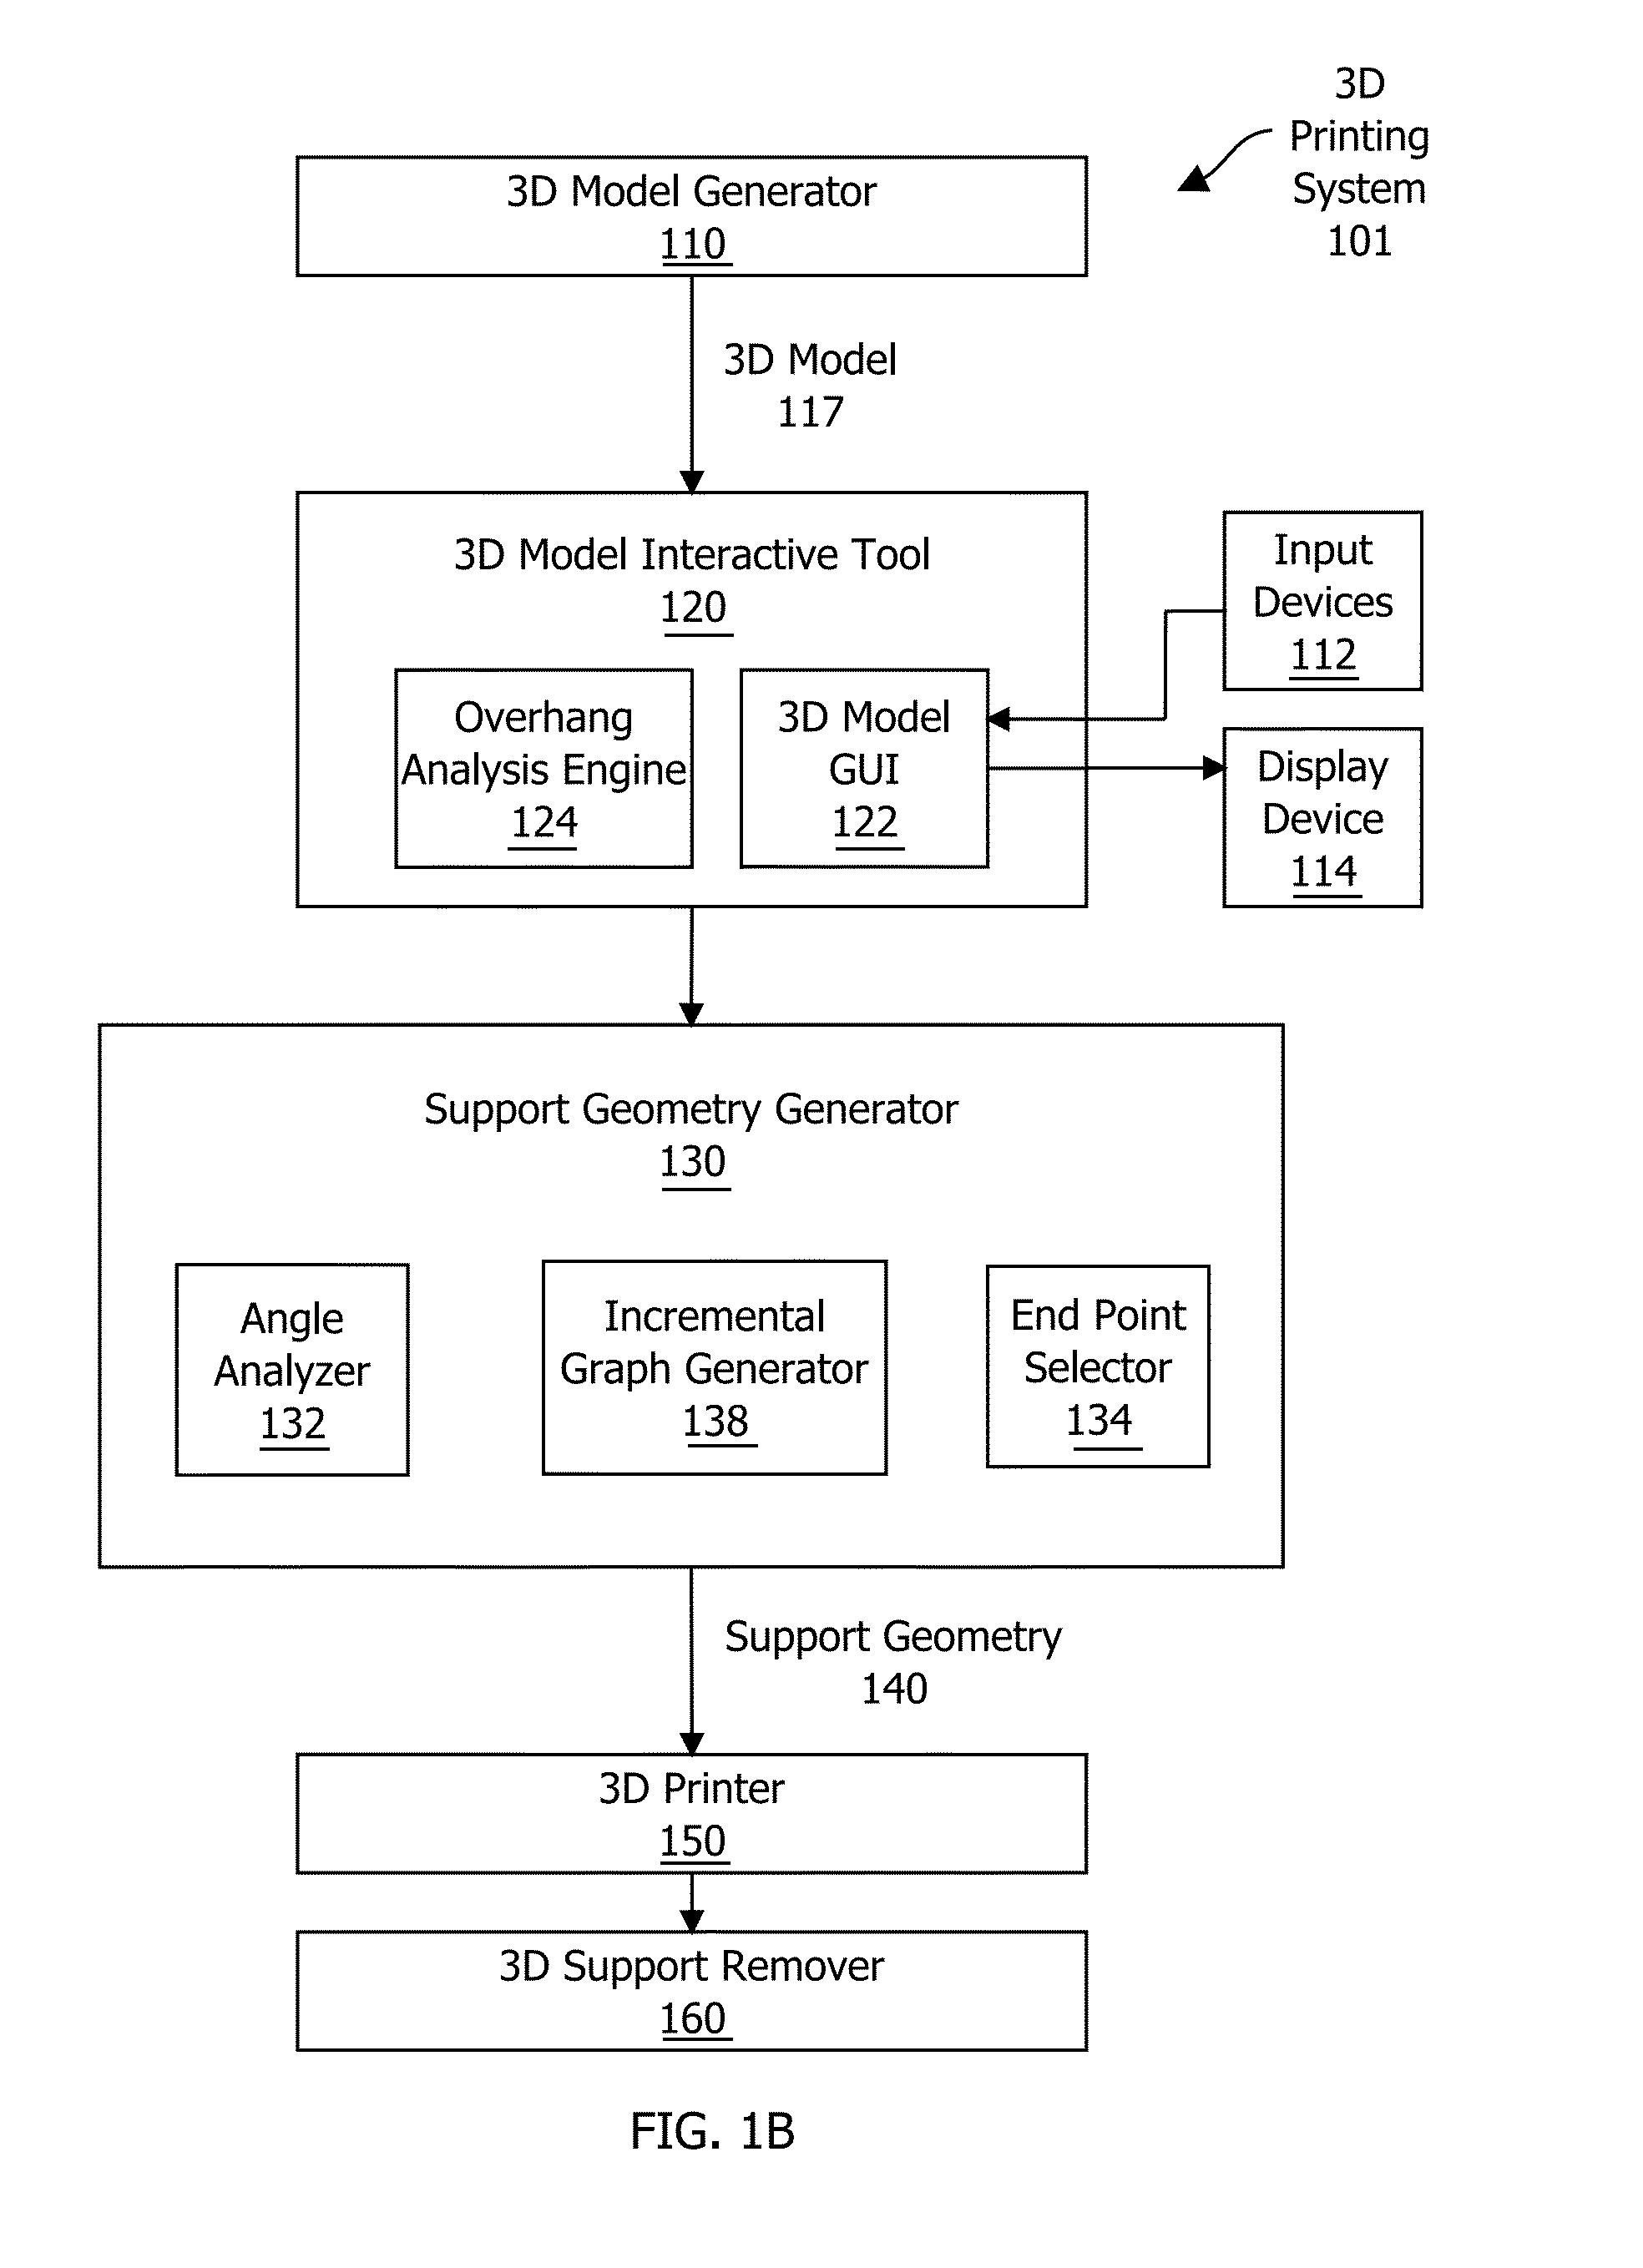 Generating support material for three-dimensional printing